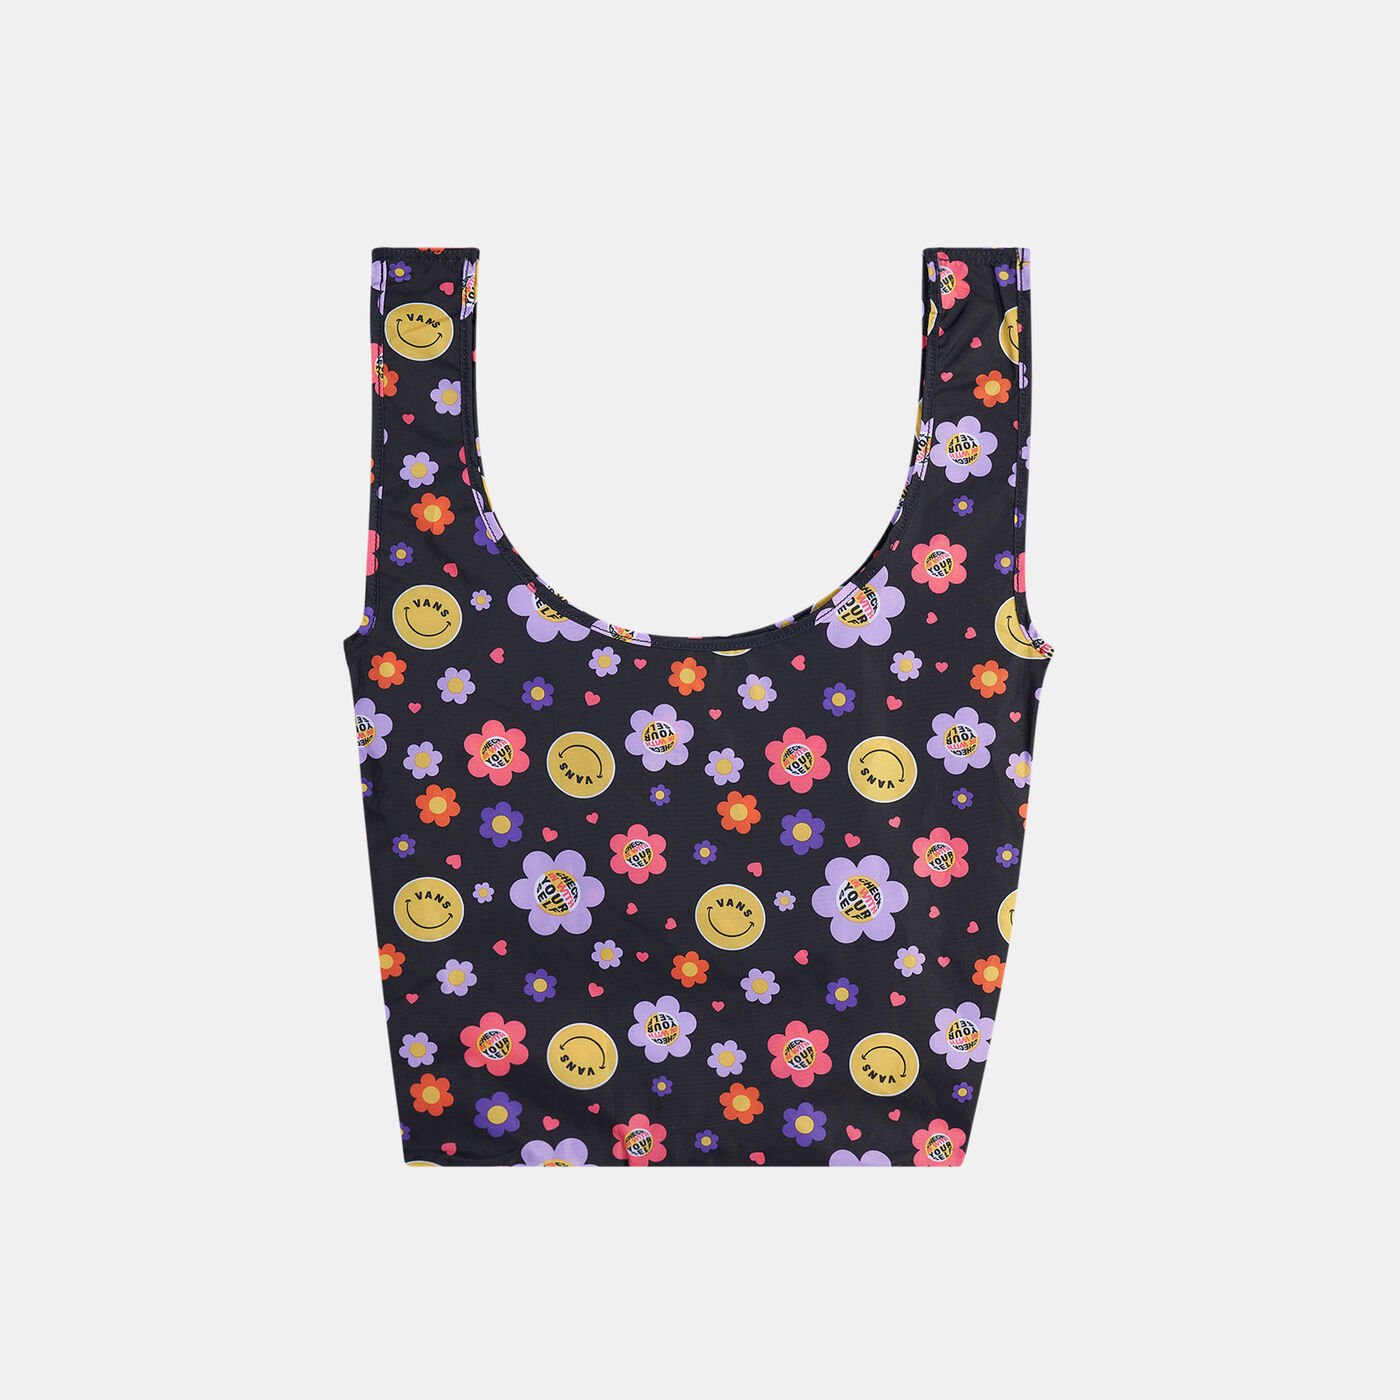 Women's Contortion Tote Bag